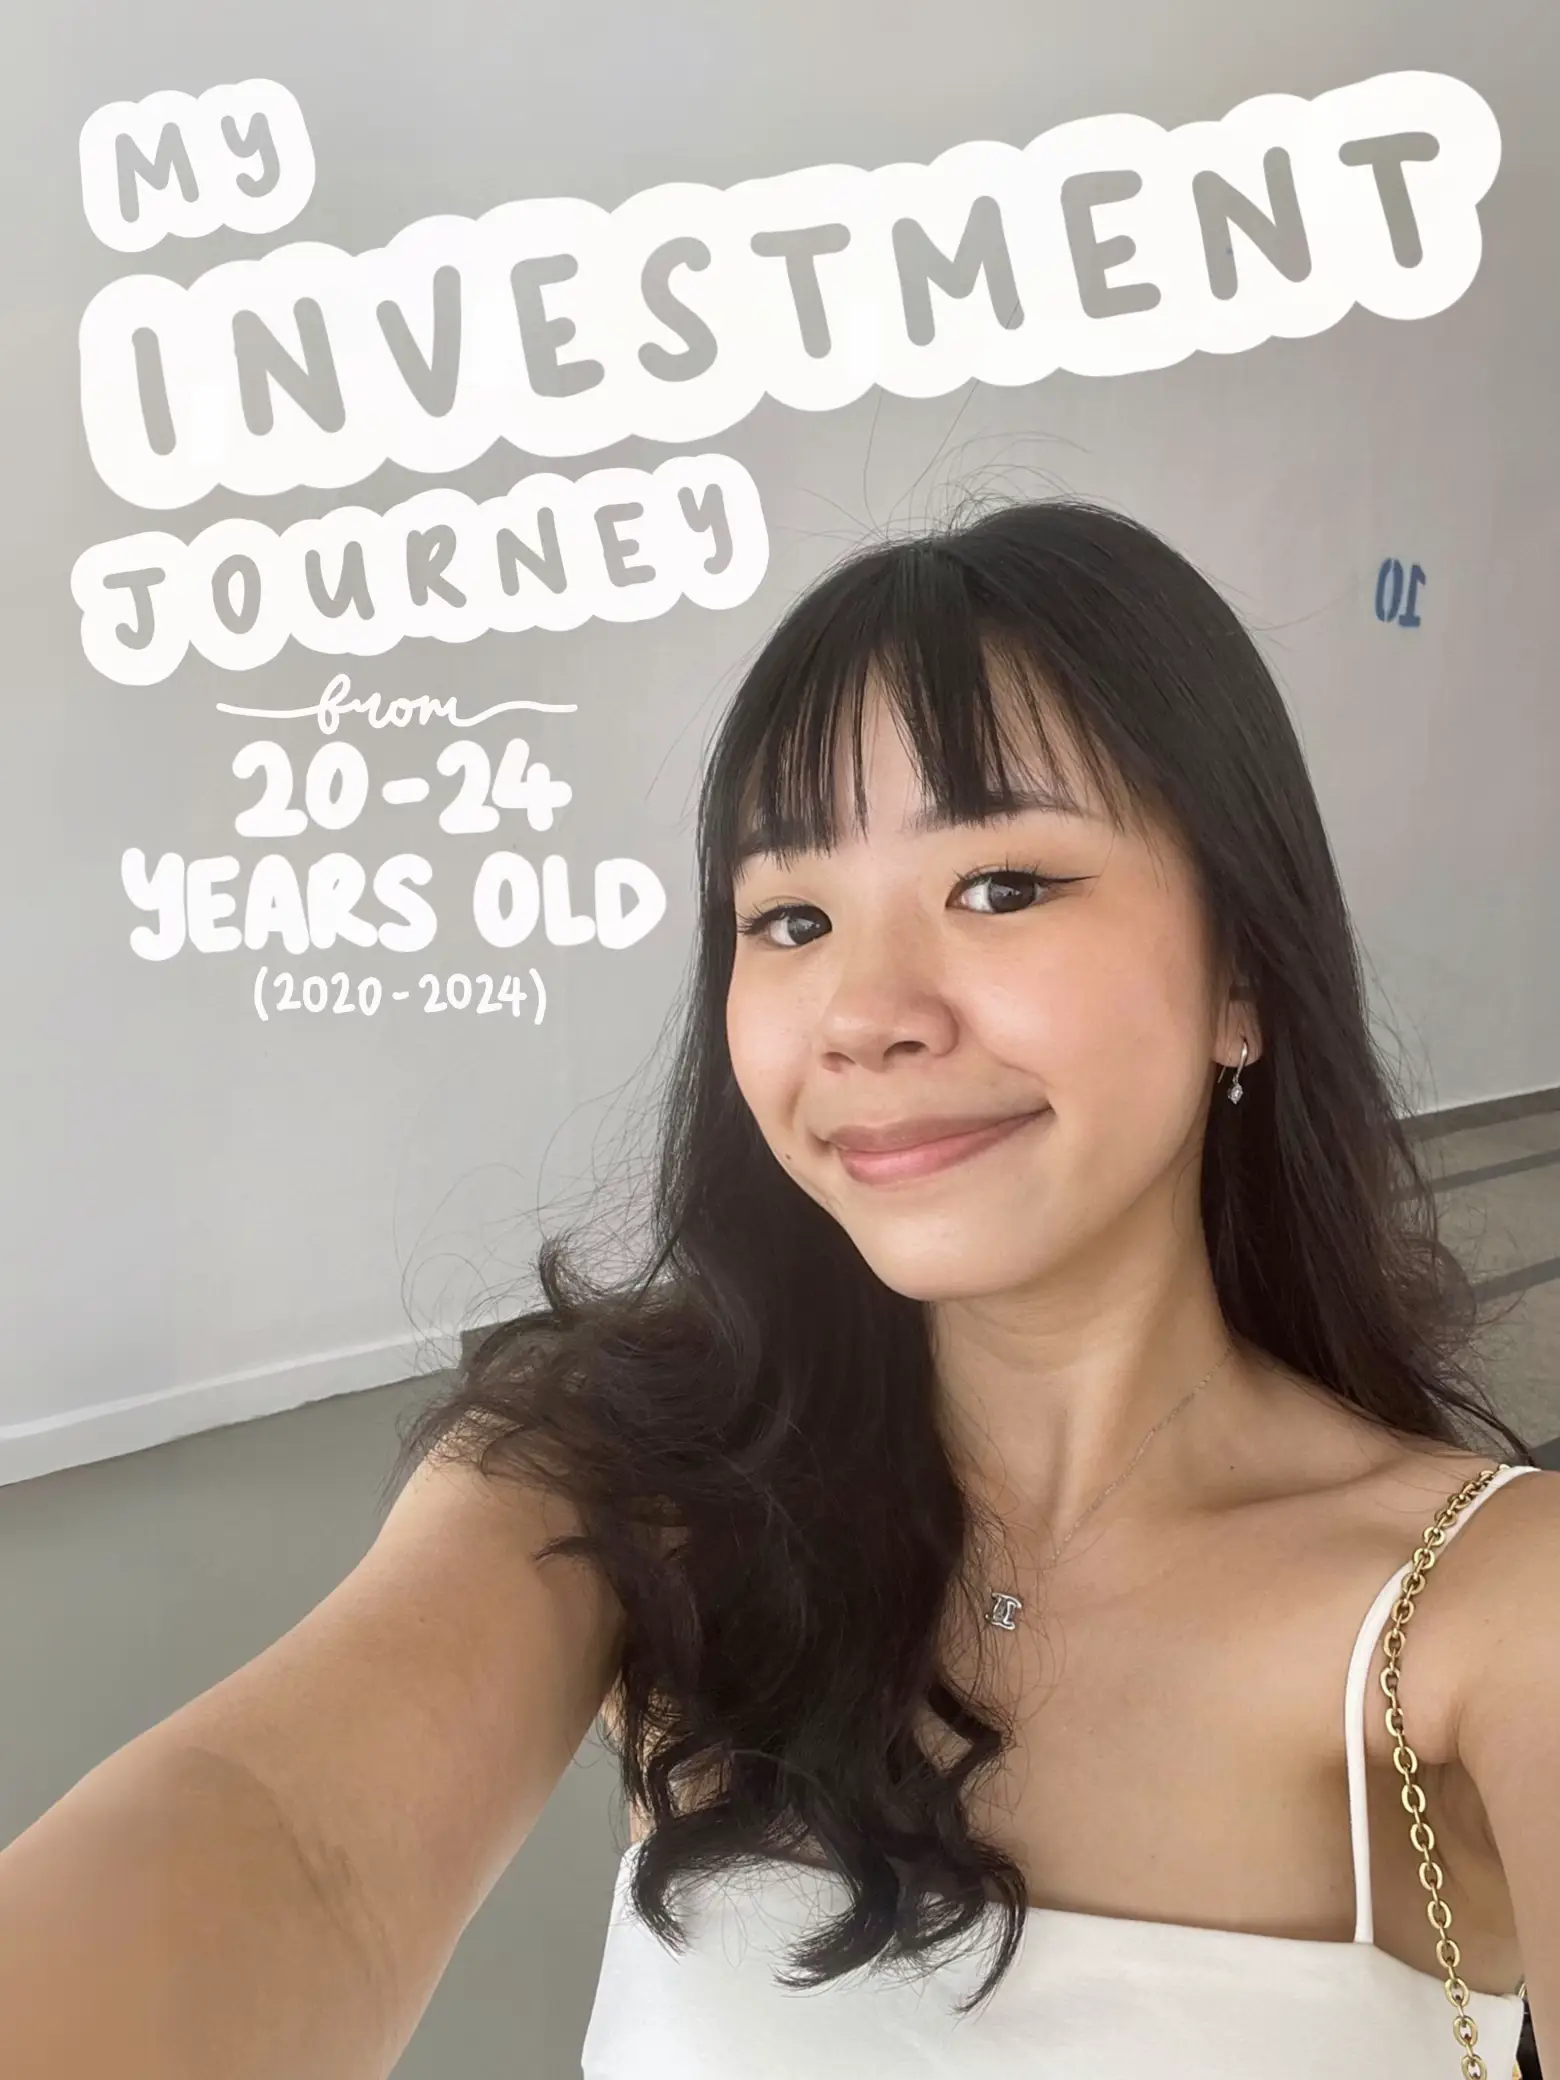 My Investment Journey from 20-24 years old (now)'s images